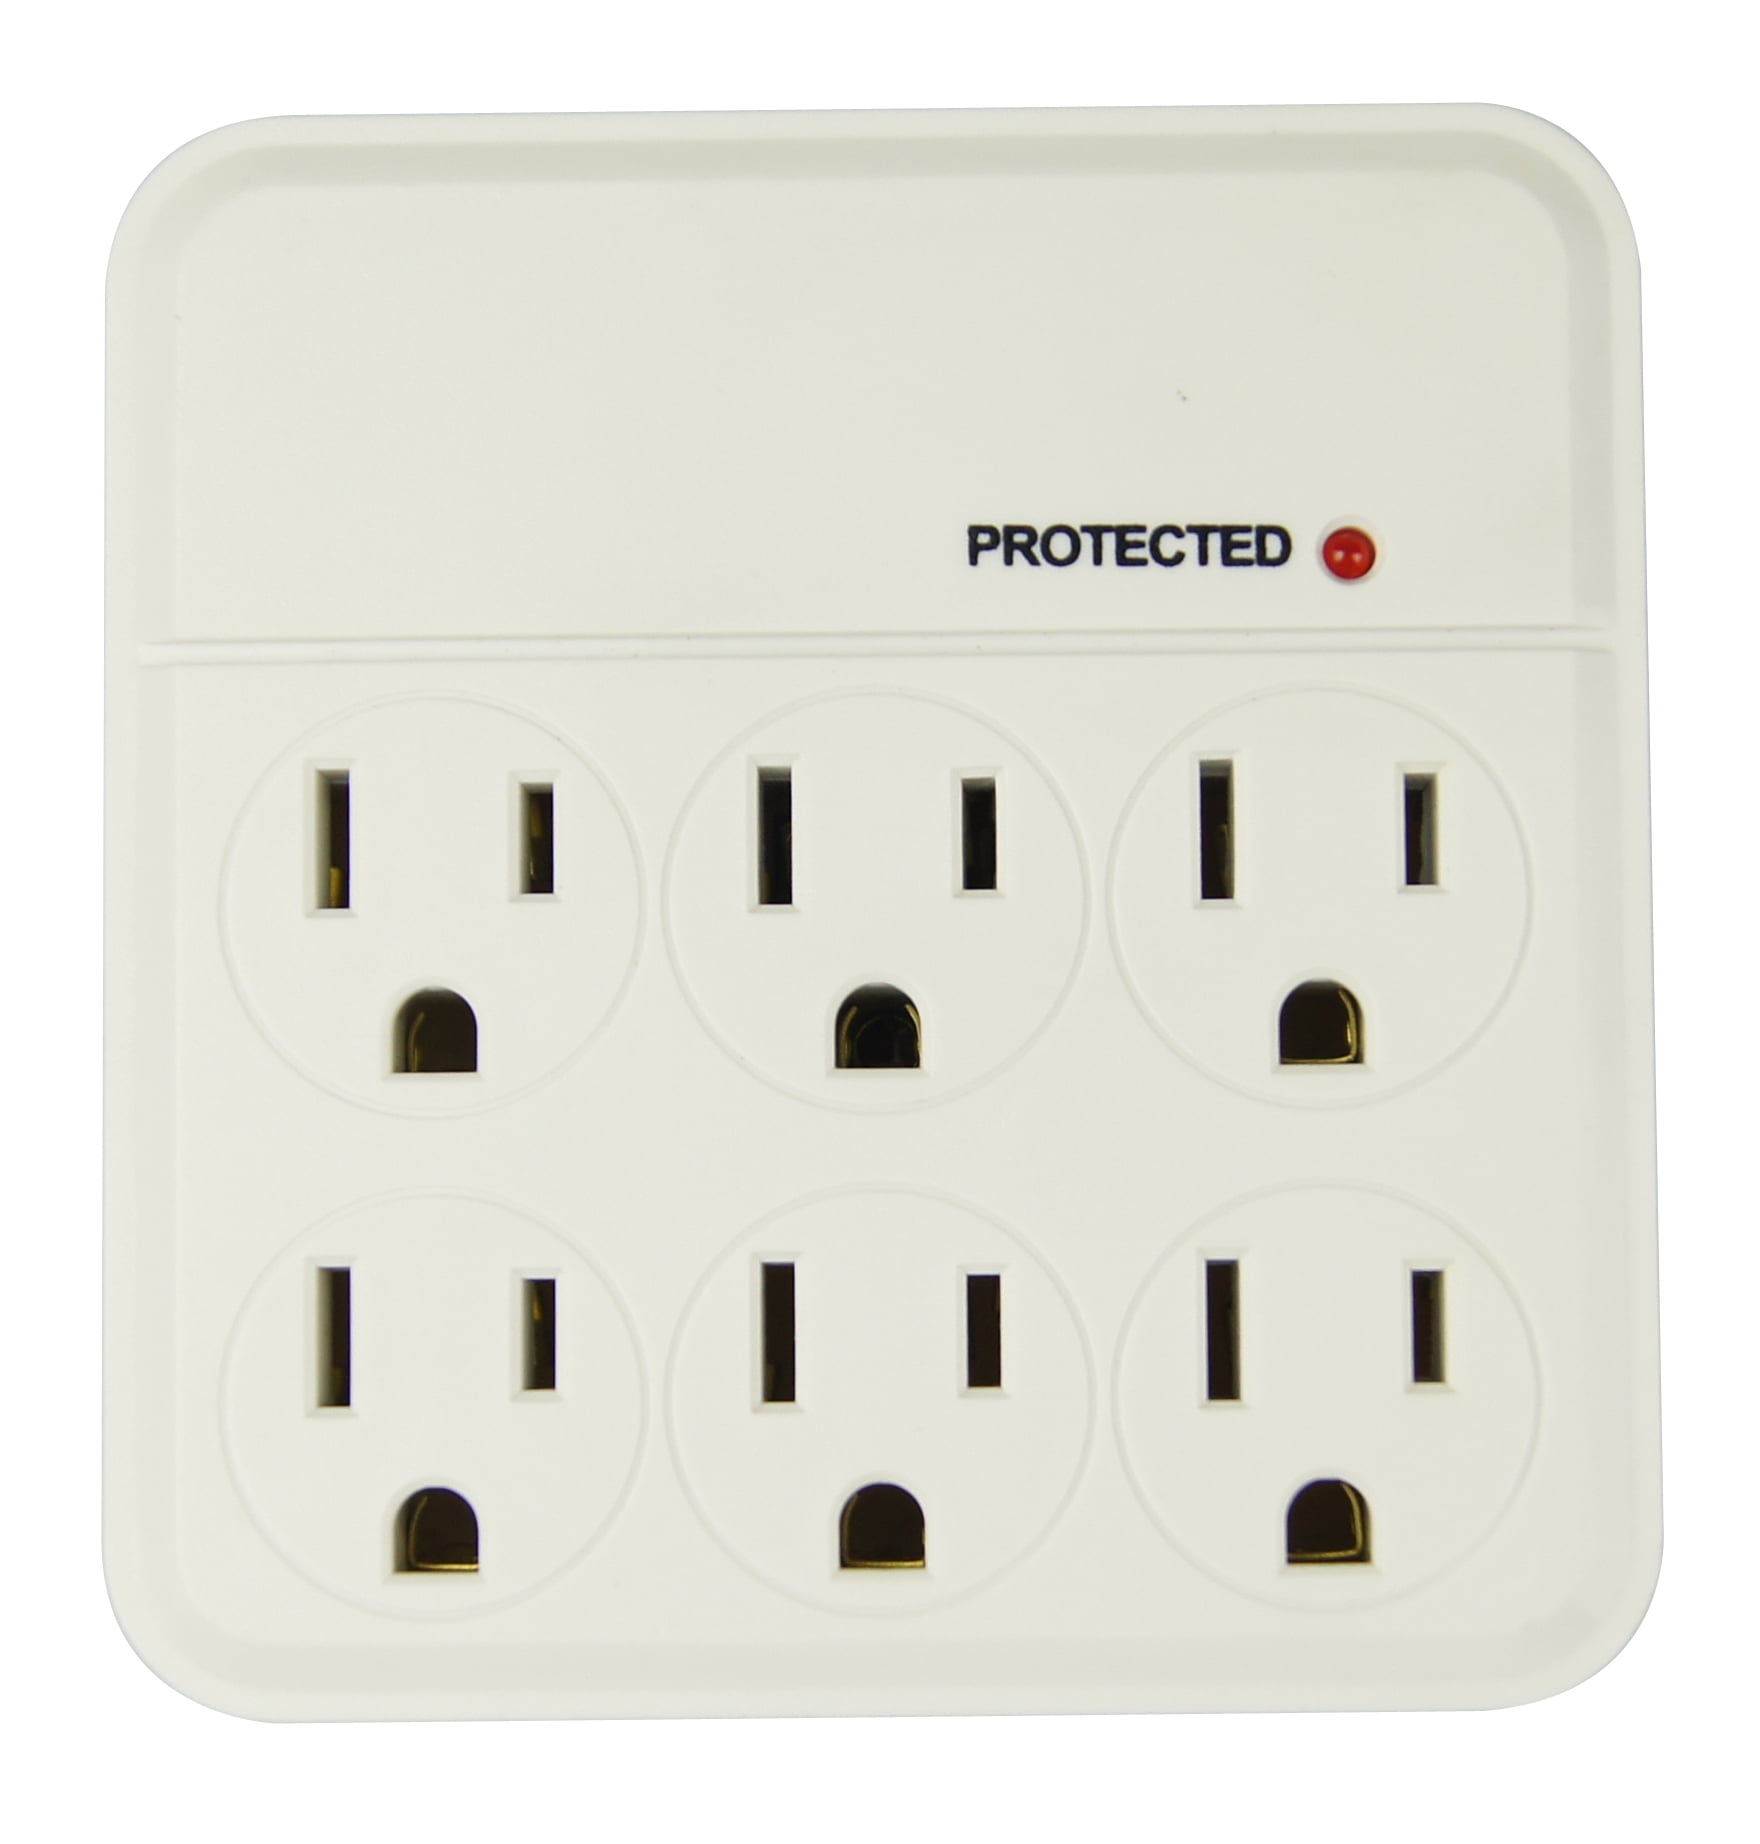 Hyper Tough 6-Outlet Surge Tap 1000-Joule Protection (White) $5 + Free S&H w/ Walmart+ or $35+